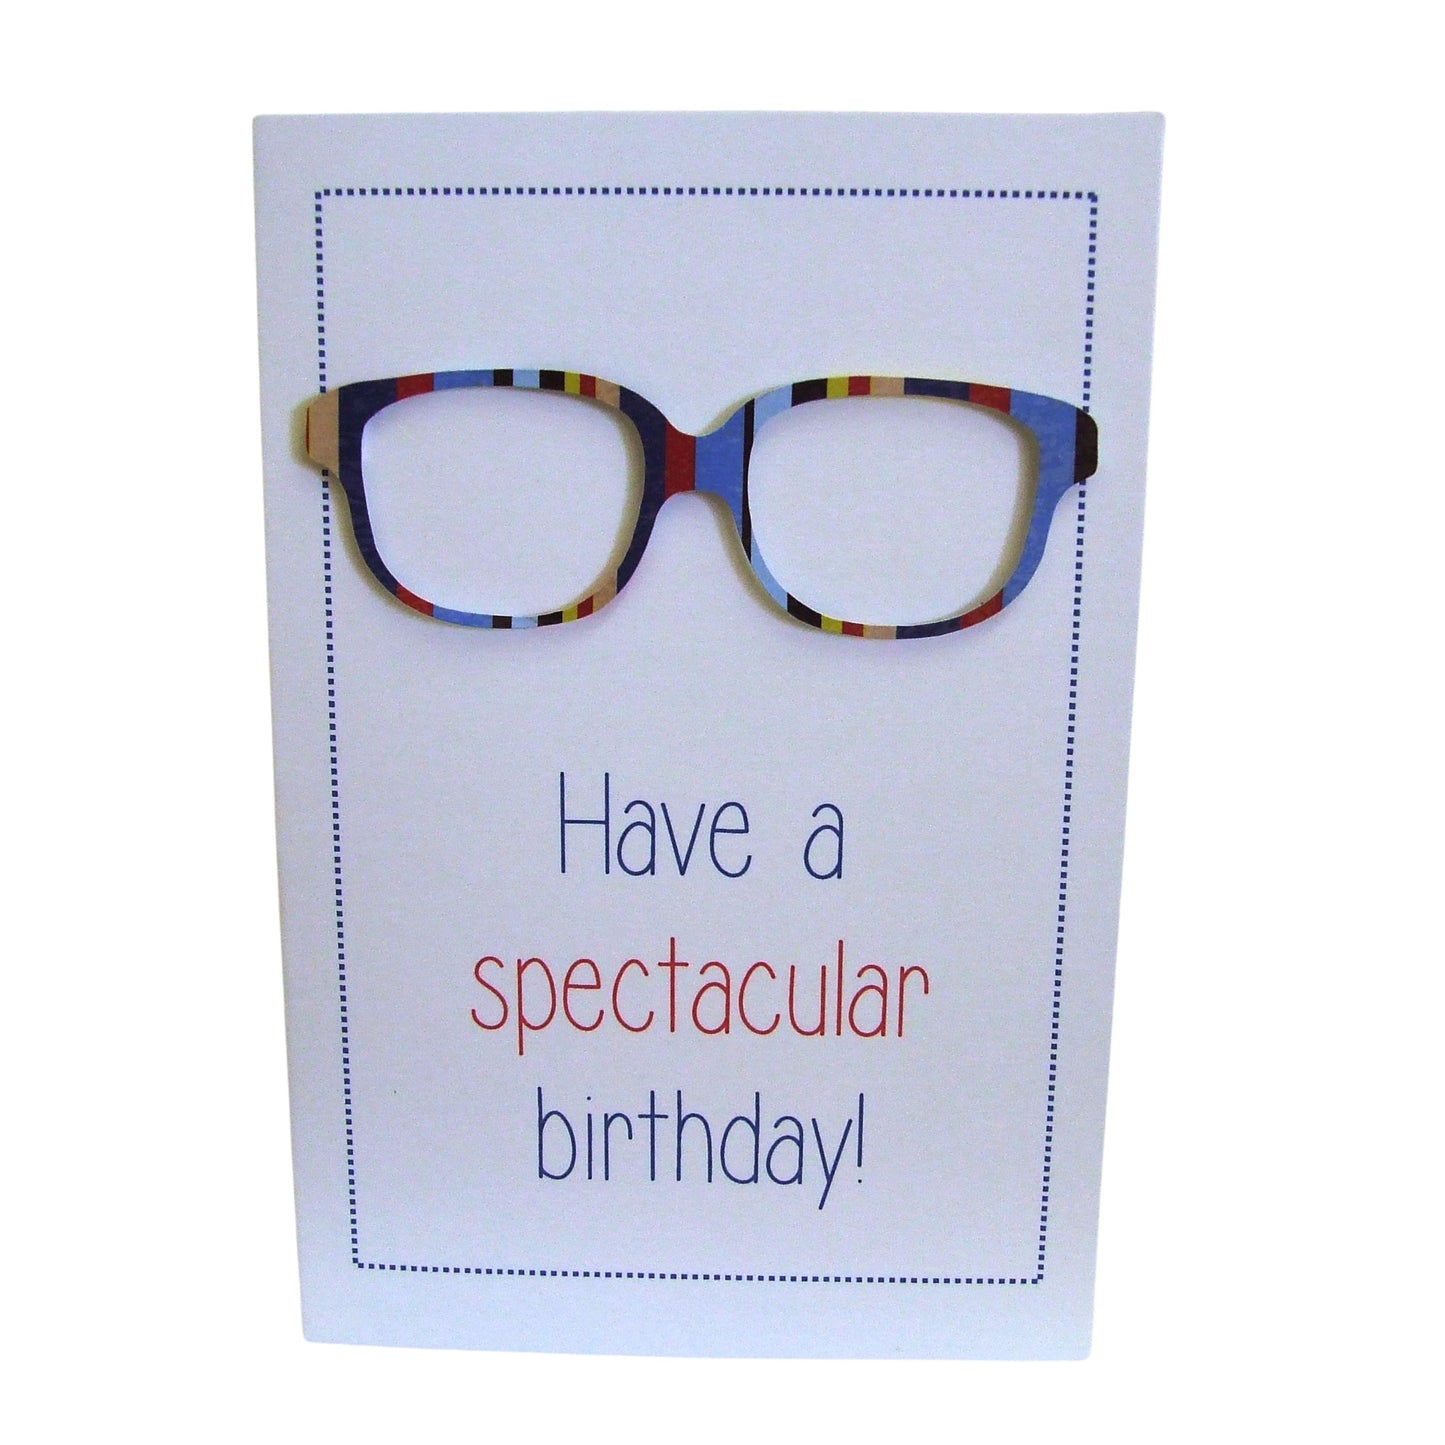 'Have a Spectacular Birthday' - Greeting Card